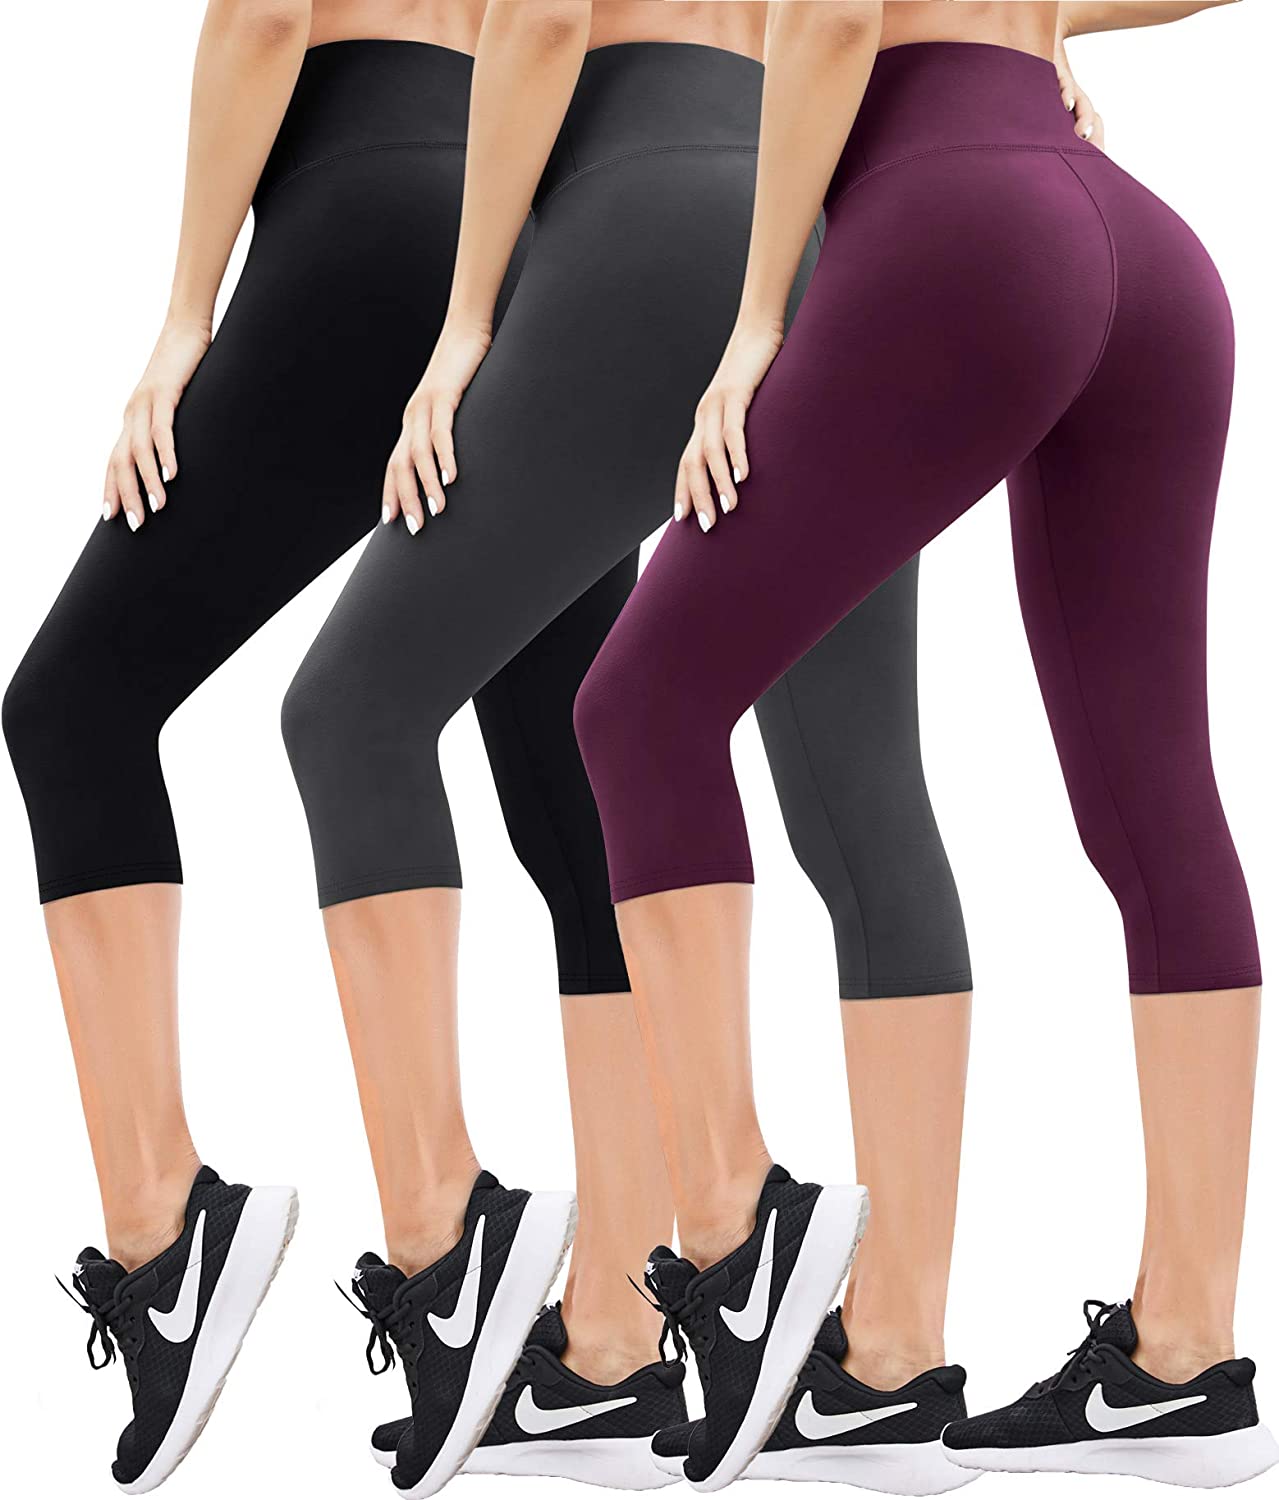 High Waisted Leggings for Women Yoga Pants for Women Yoga Leggings Workout Leggings for Women Tummy Control